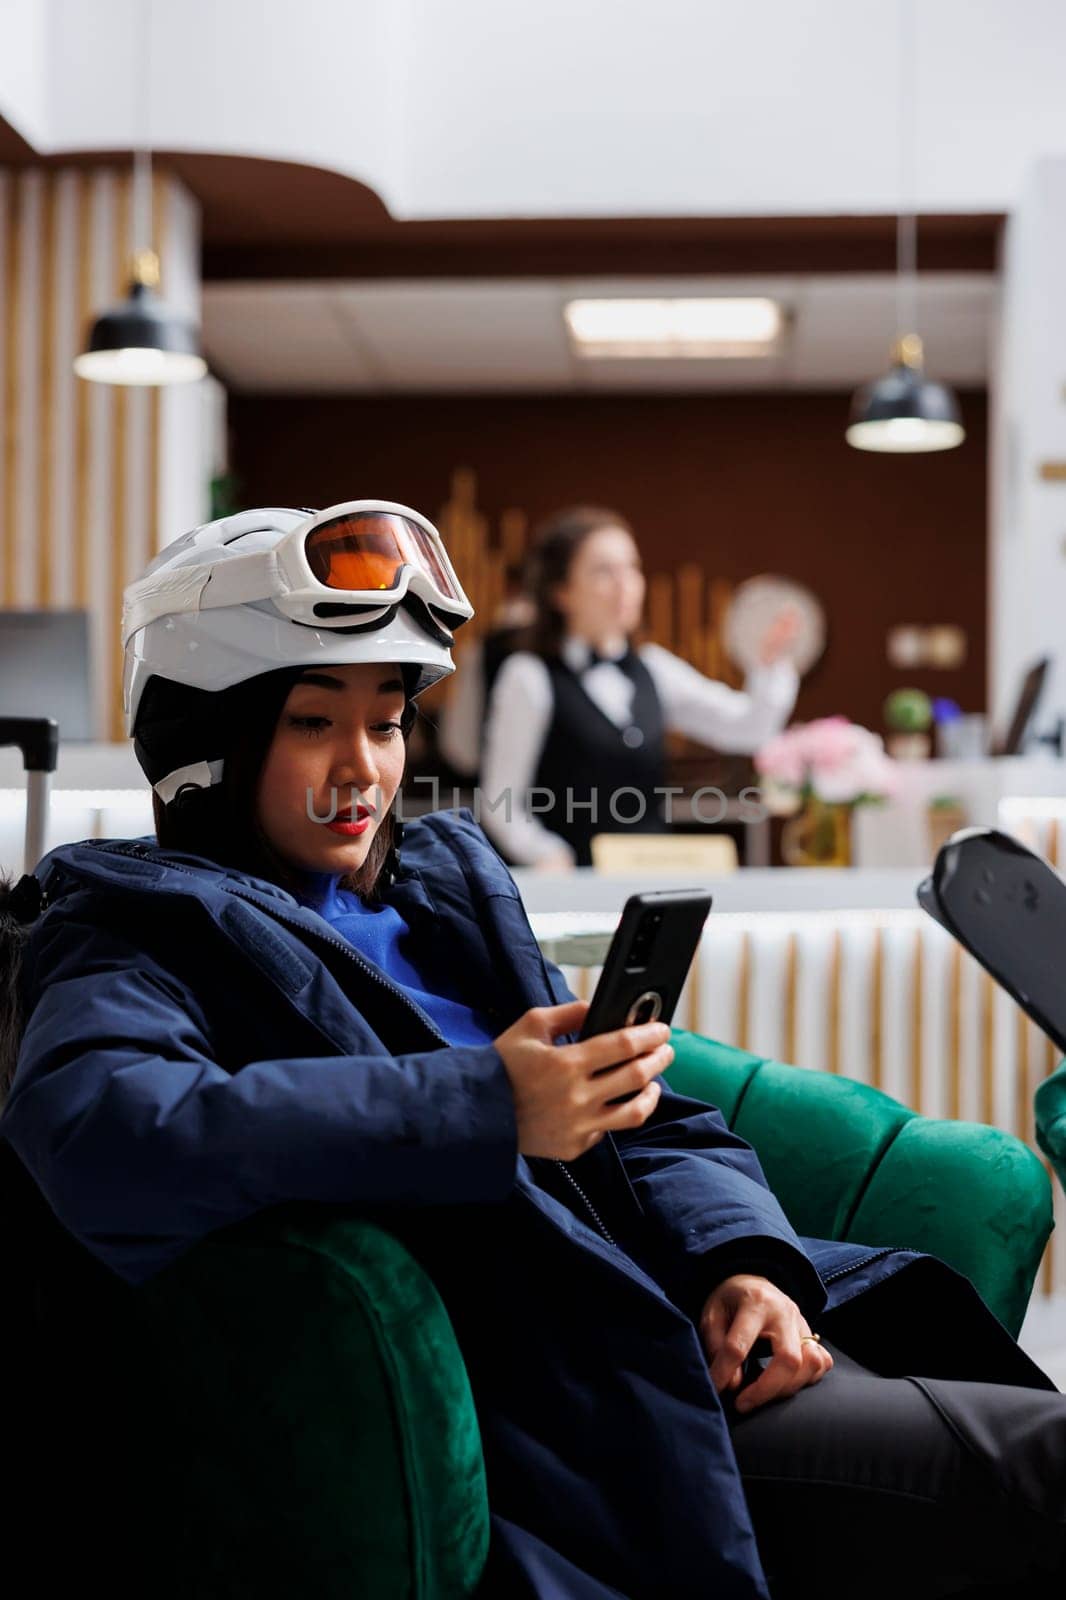 During winter holiday young asian woman uses mobile phone in cozy lounge area. Female guest sitting on sofa with digital smart device and skiing skis wearing winter jacket ski goggles and helmet.